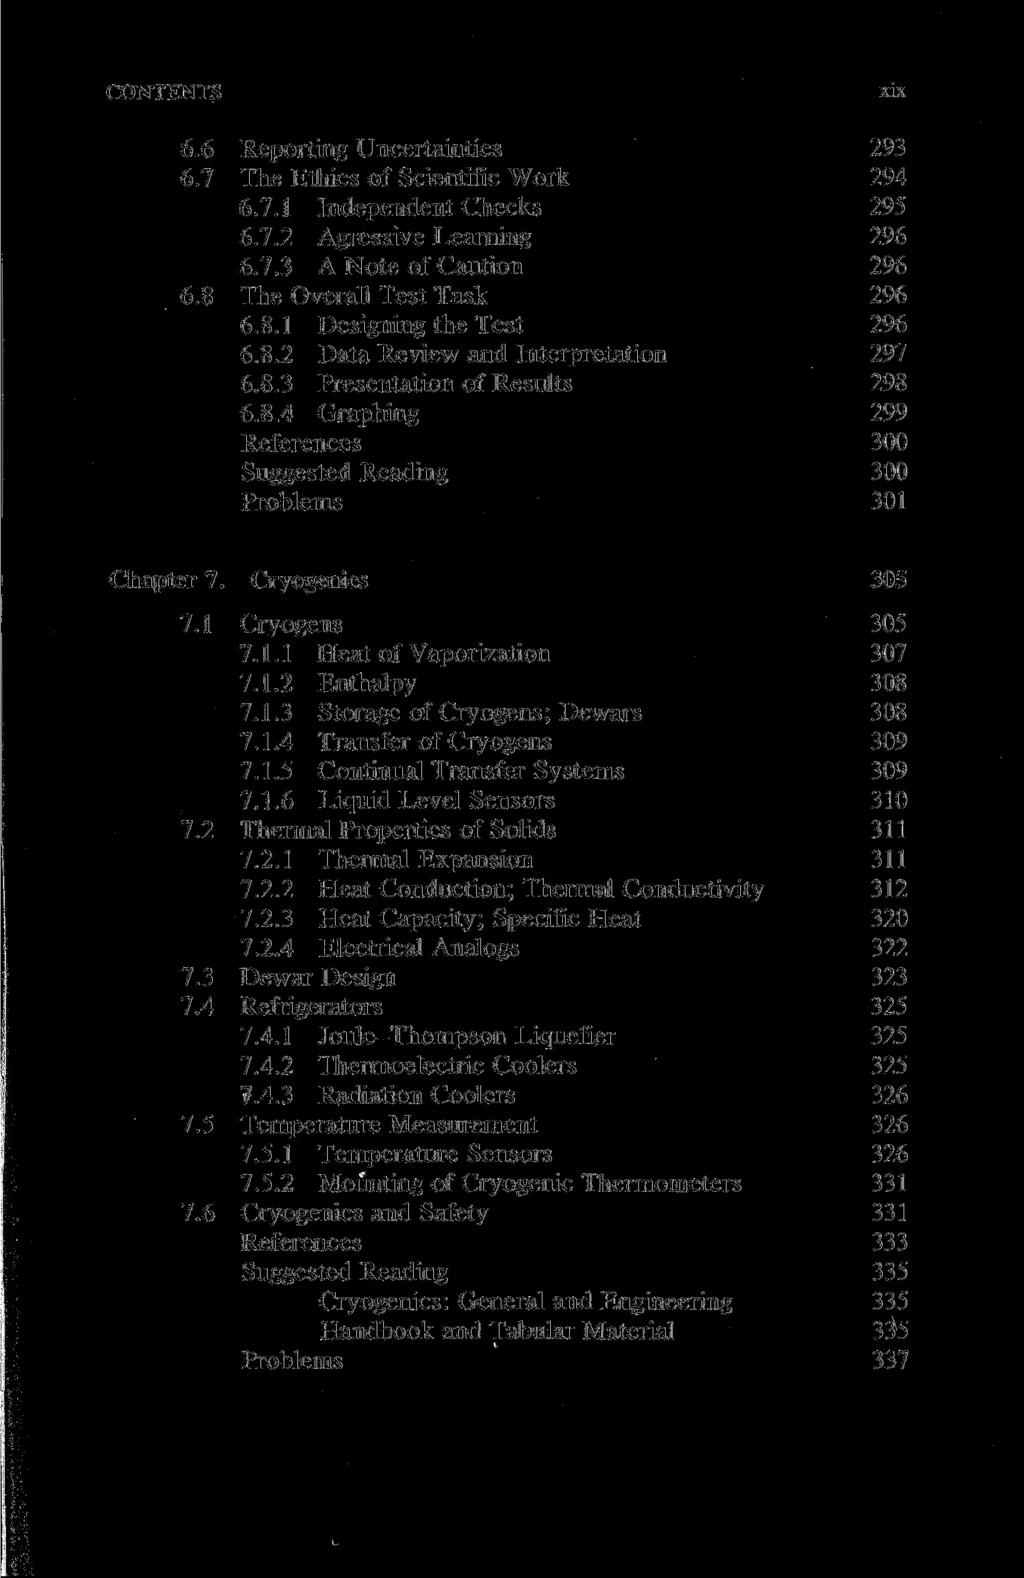 CONTENTS xix 6.6 Reporting Uncertainties 293 6.7 The Ethics of Scientific Work 294 6.7.1 Independent Checks 295 6.7.2 Agressive Learning 296 6.7.3 A Note of Caution 296 6.